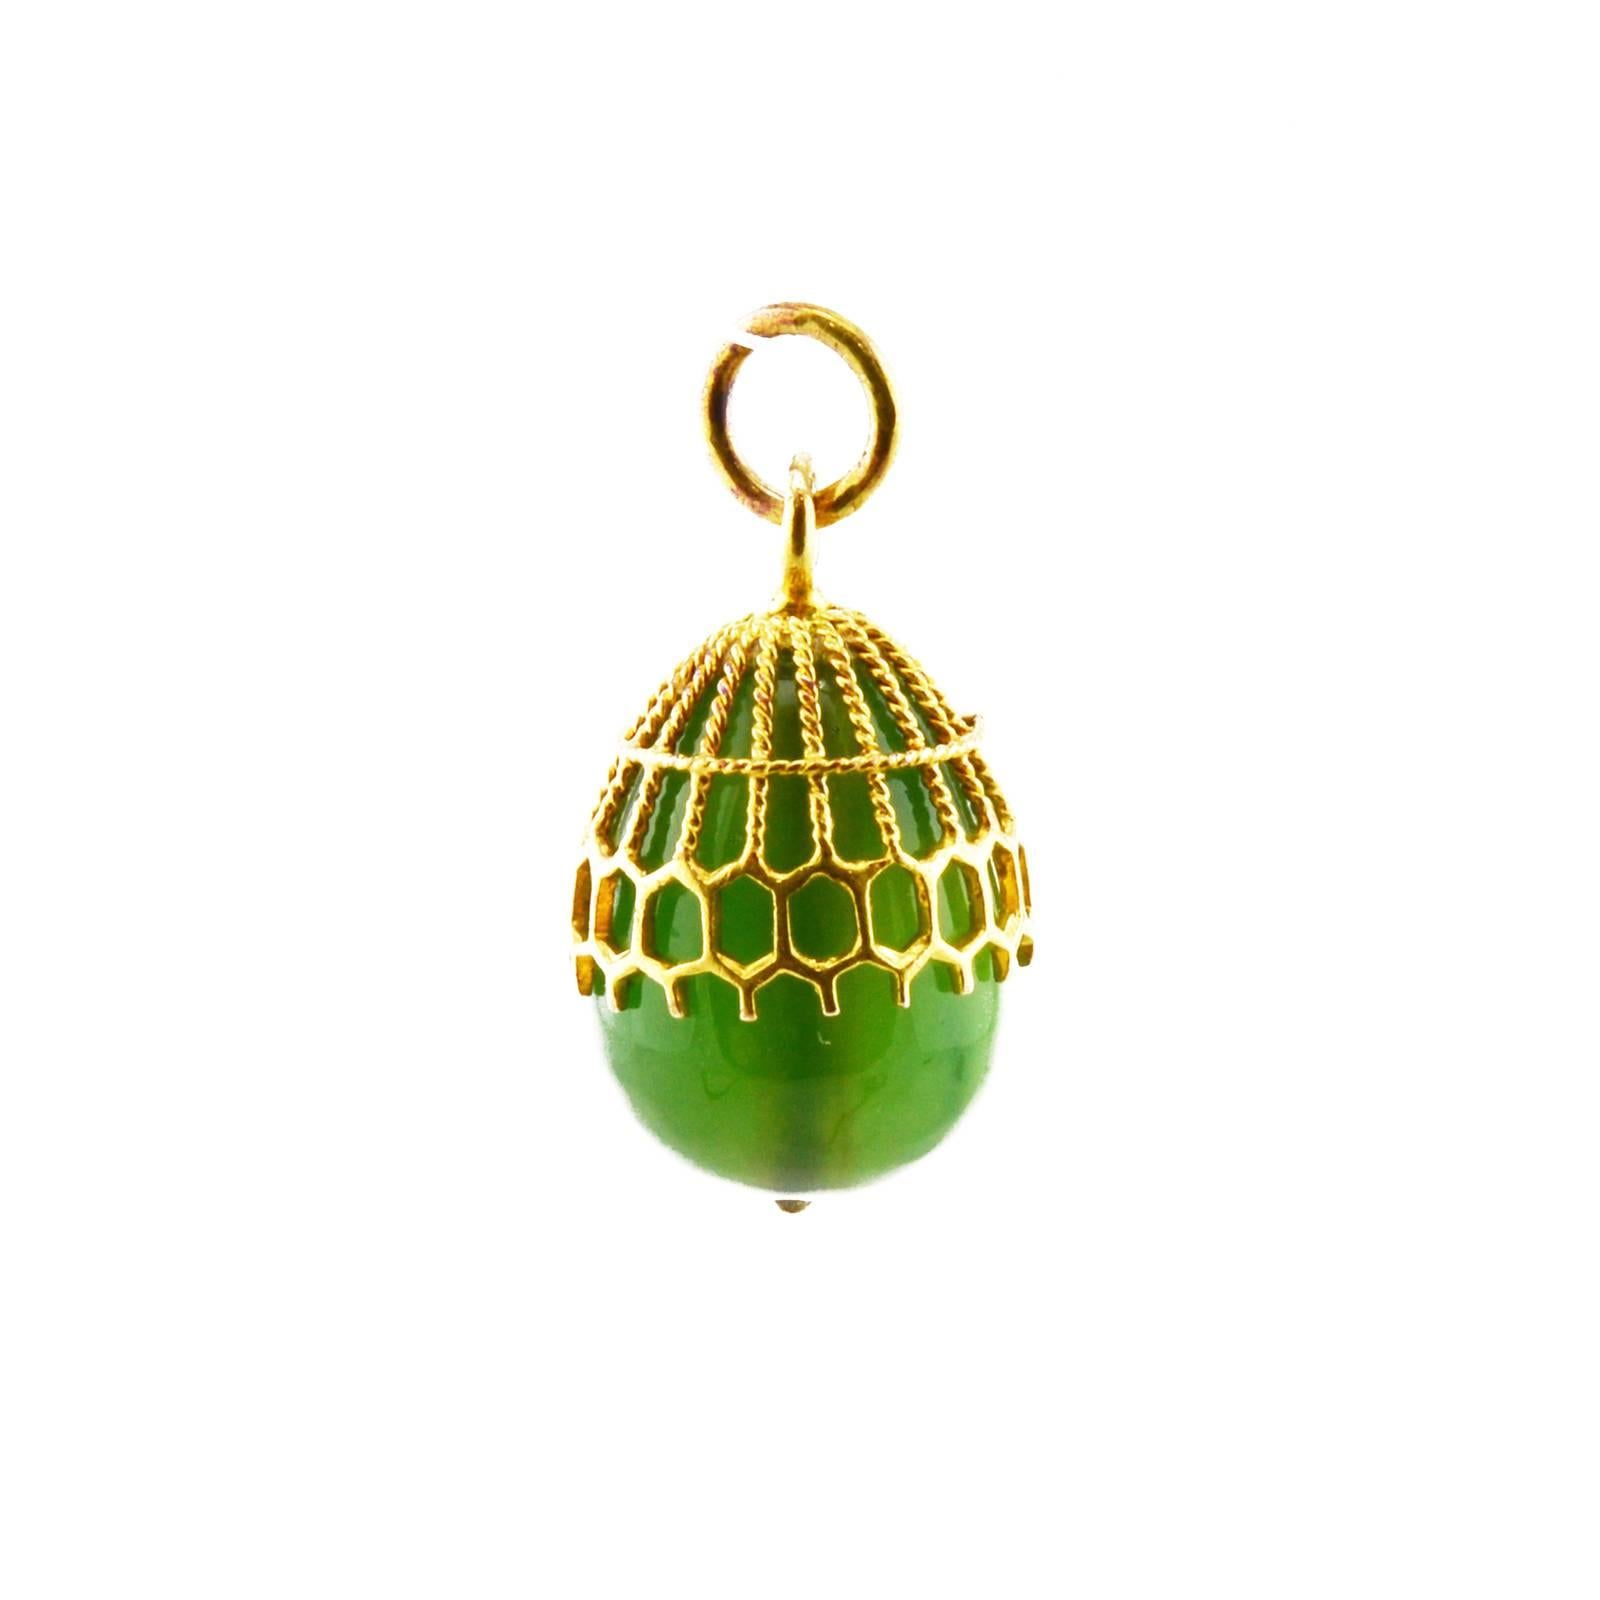 A Russian gold and nephrite miniature pendant Easter egg, St. Petersburg, 1908-1907. The carved nephrite egg held in a gold honeycomb and twisted cable cagework mount, struck with assayer's mark for the St. Petersburg district and 56 gold standard